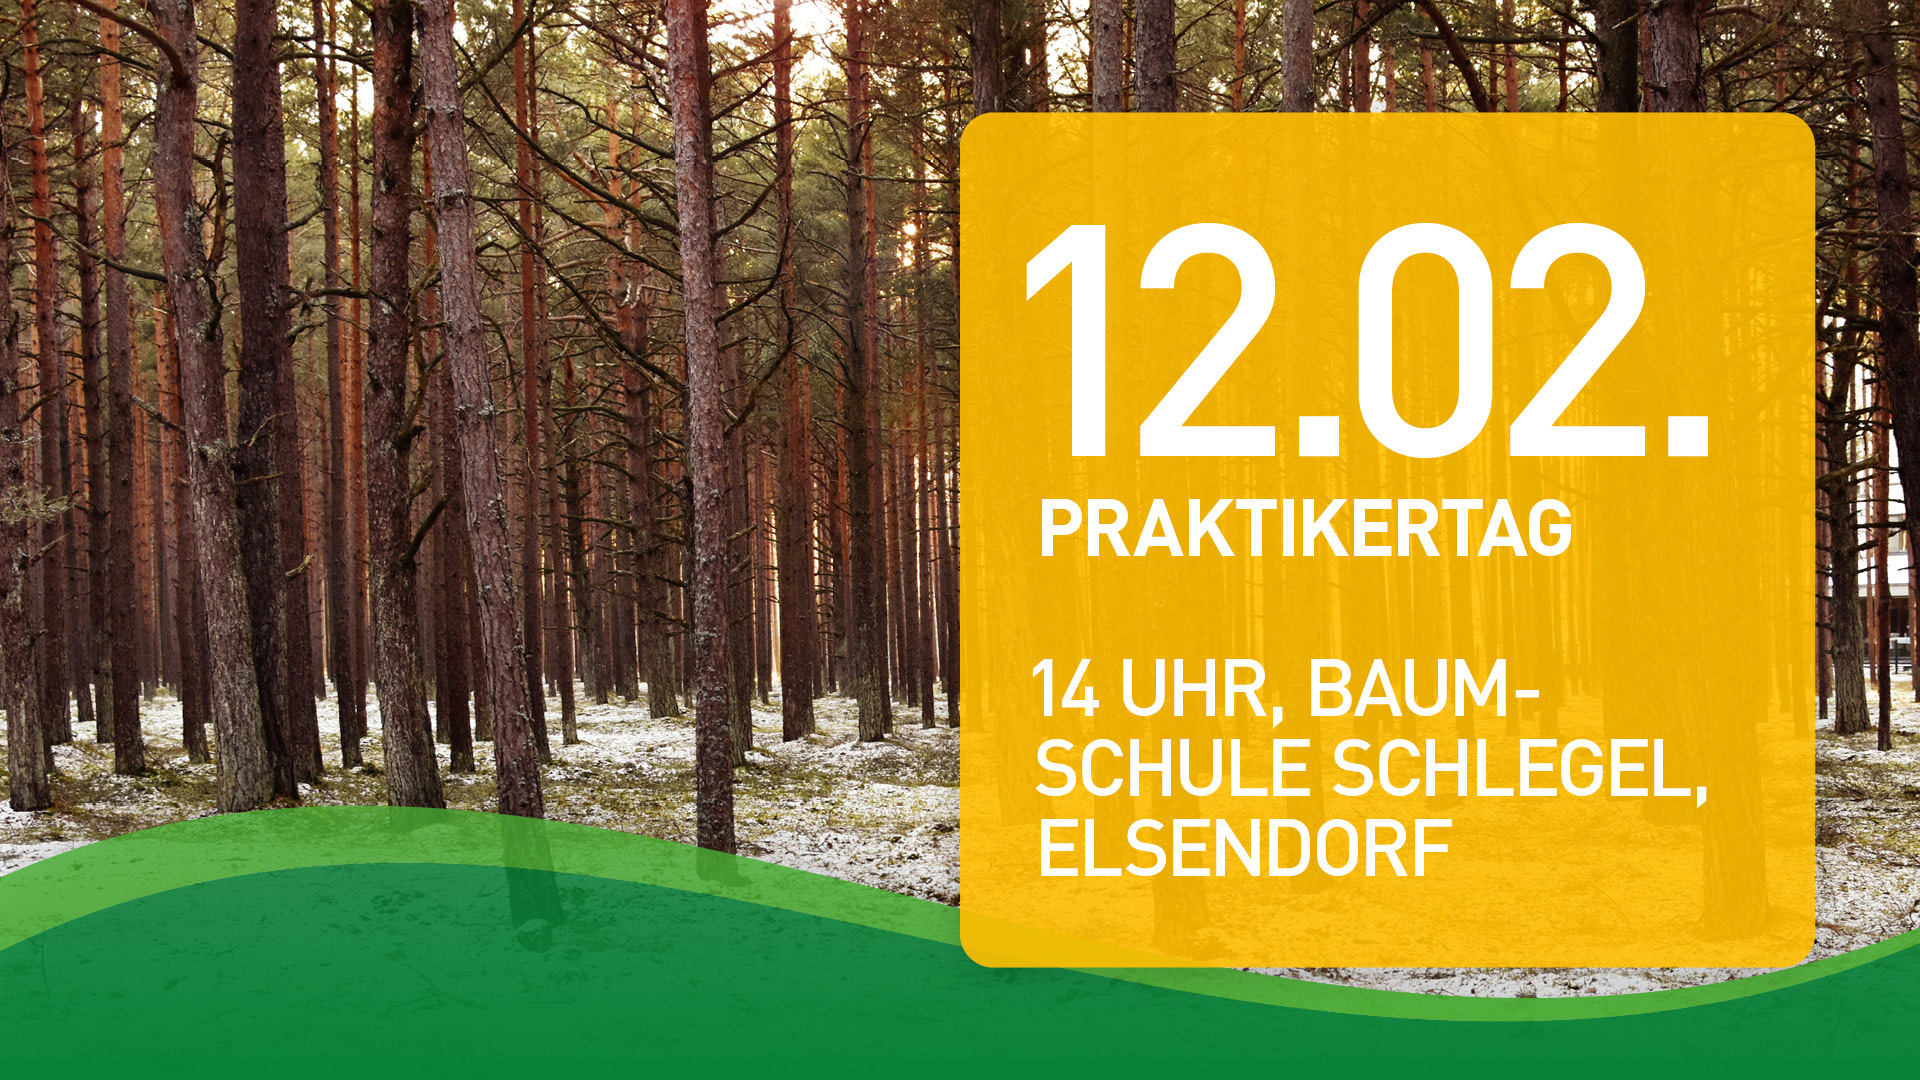 Read more about the article Praktikertag 12.02.2022